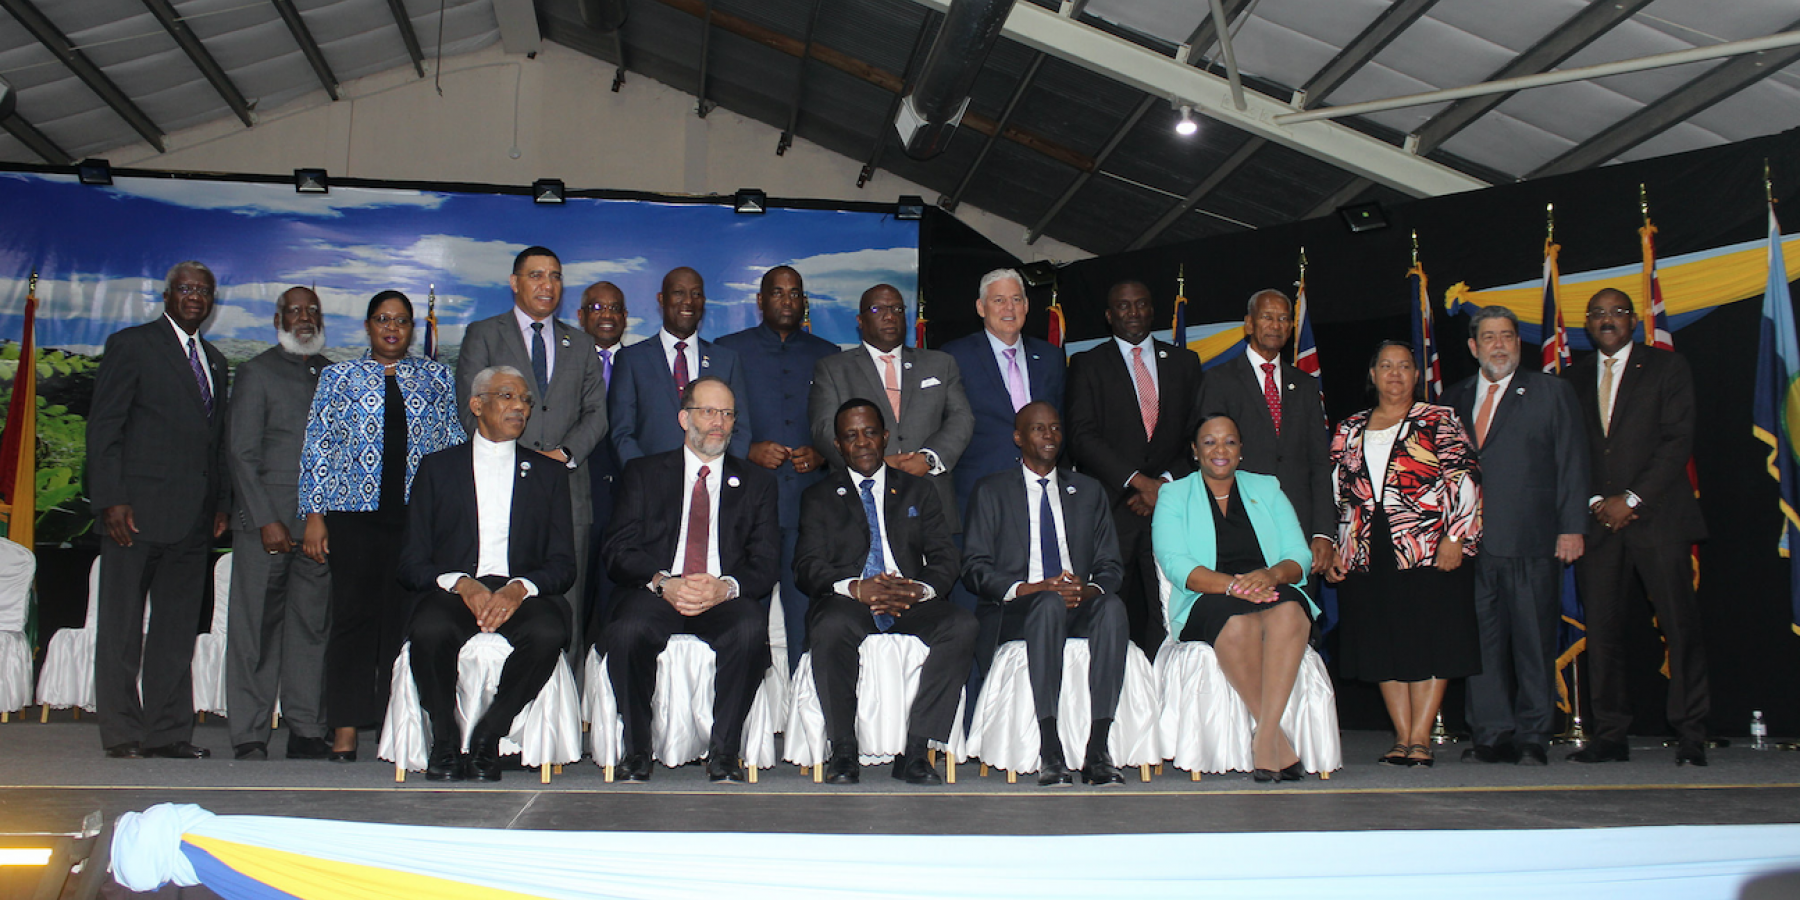 Opening ceremony, 38th Meeting of the Conference of Heads of Government of CARICOM, Grenada Trade Centre, Grenada, 4 July, 2017.